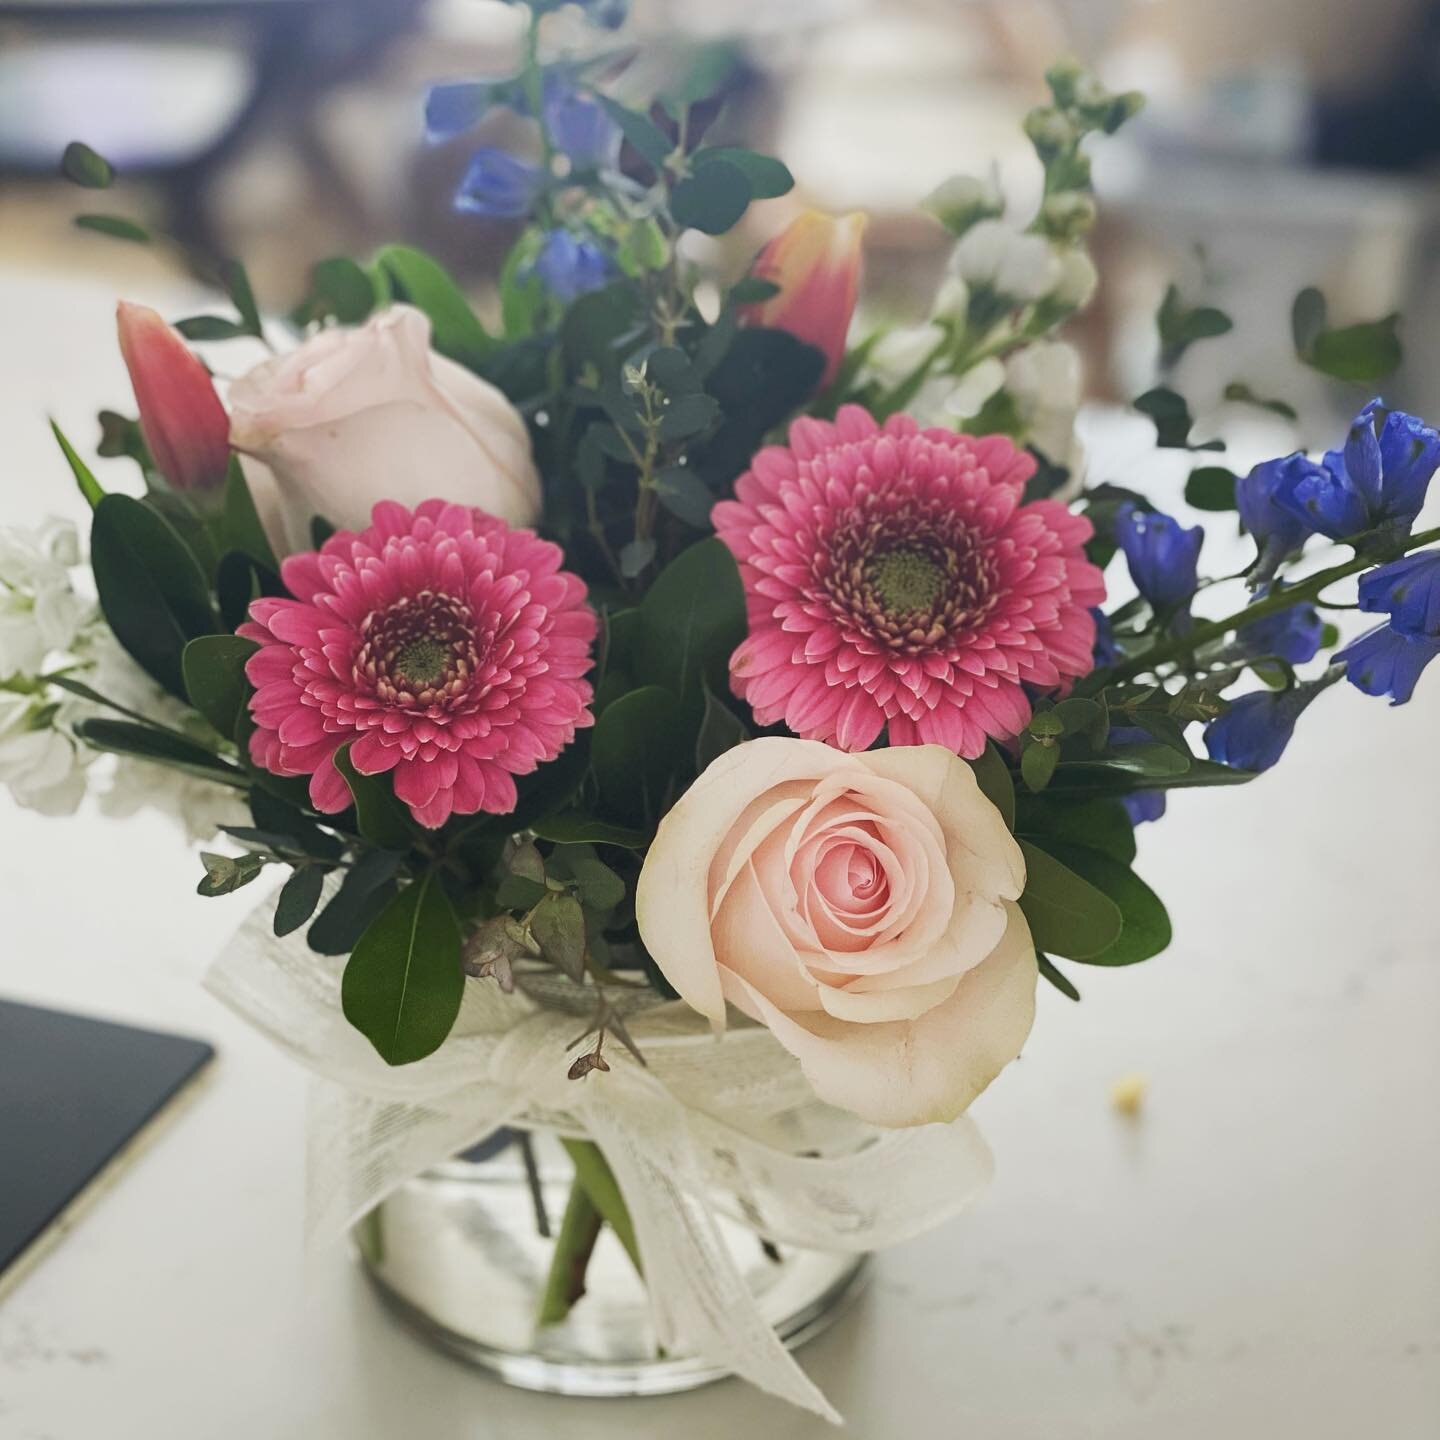 (Long post and a picture on the feed?! *feeling rebellious*)

It&rsquo;s been a loooong few weeks (see also: months, years 🙃). These flowers that someone dropped off today brought me some joy that I was really longing for. Life is hard, folks. Don&r